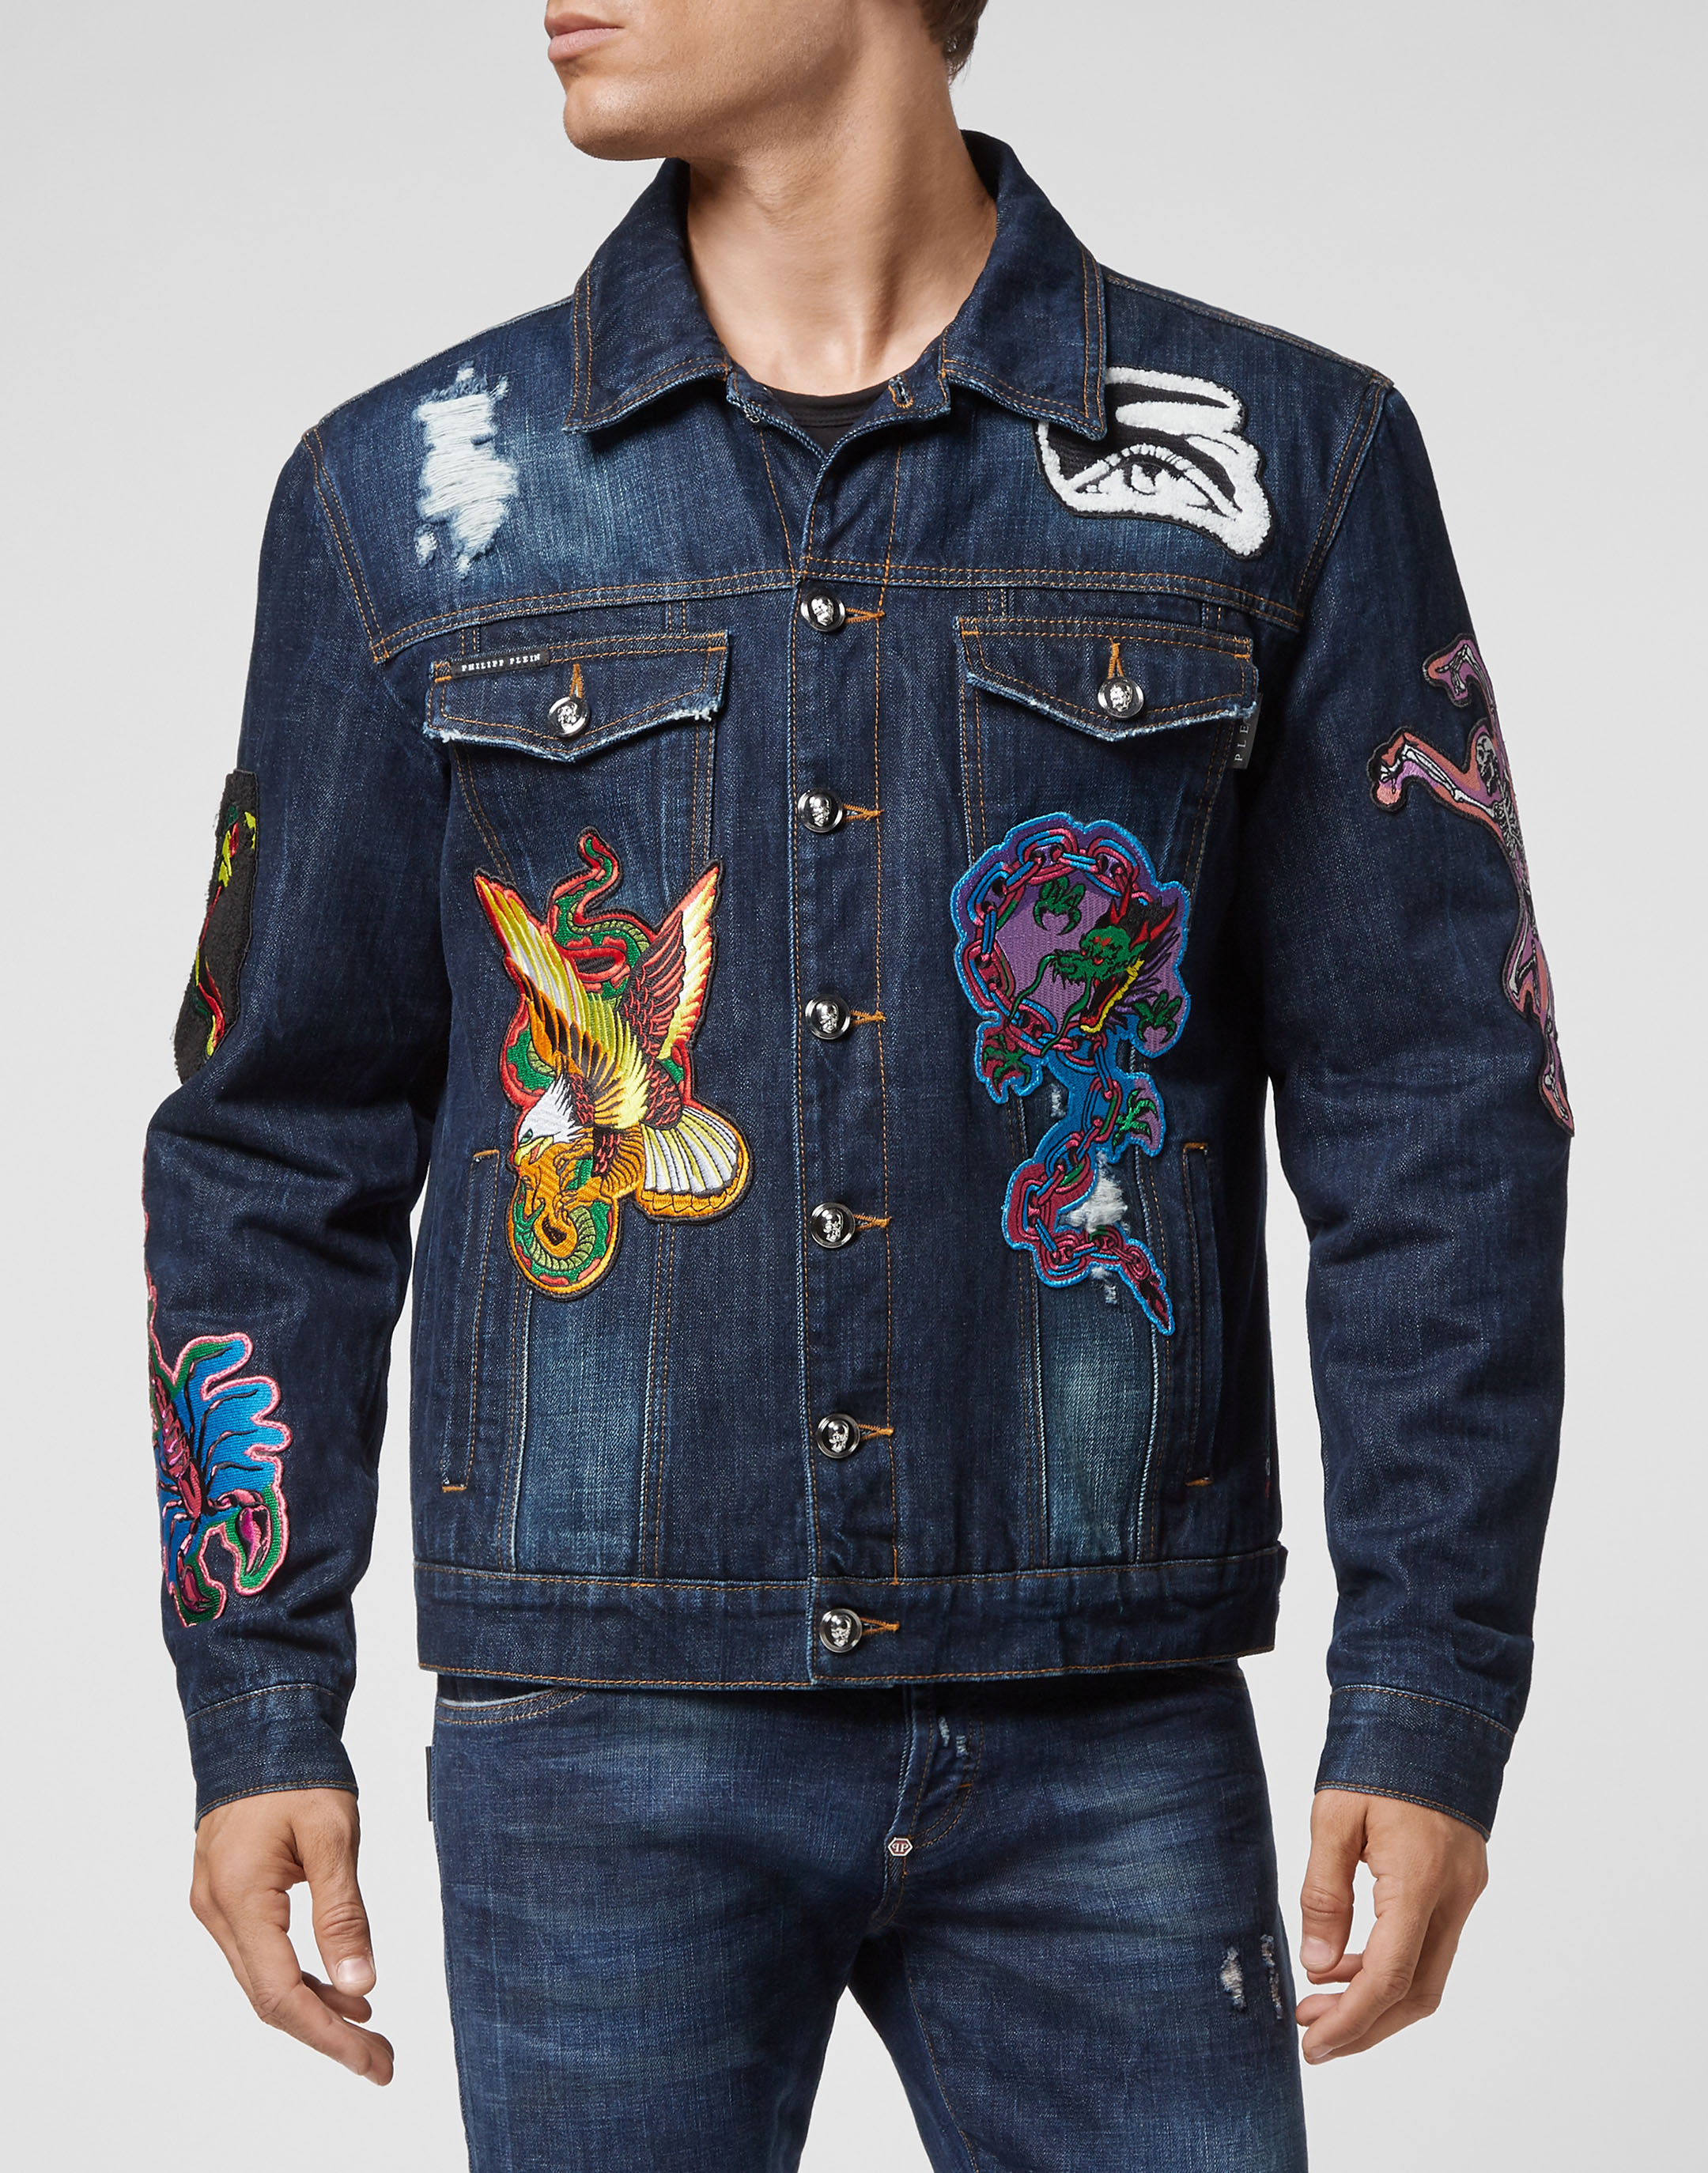 Ultra Game NBA Men's Distressed Multi-Team Denim Patch Jean Jacket : Buy  Online at Best Price in KSA - Souq is now Amazon.sa: Fashion